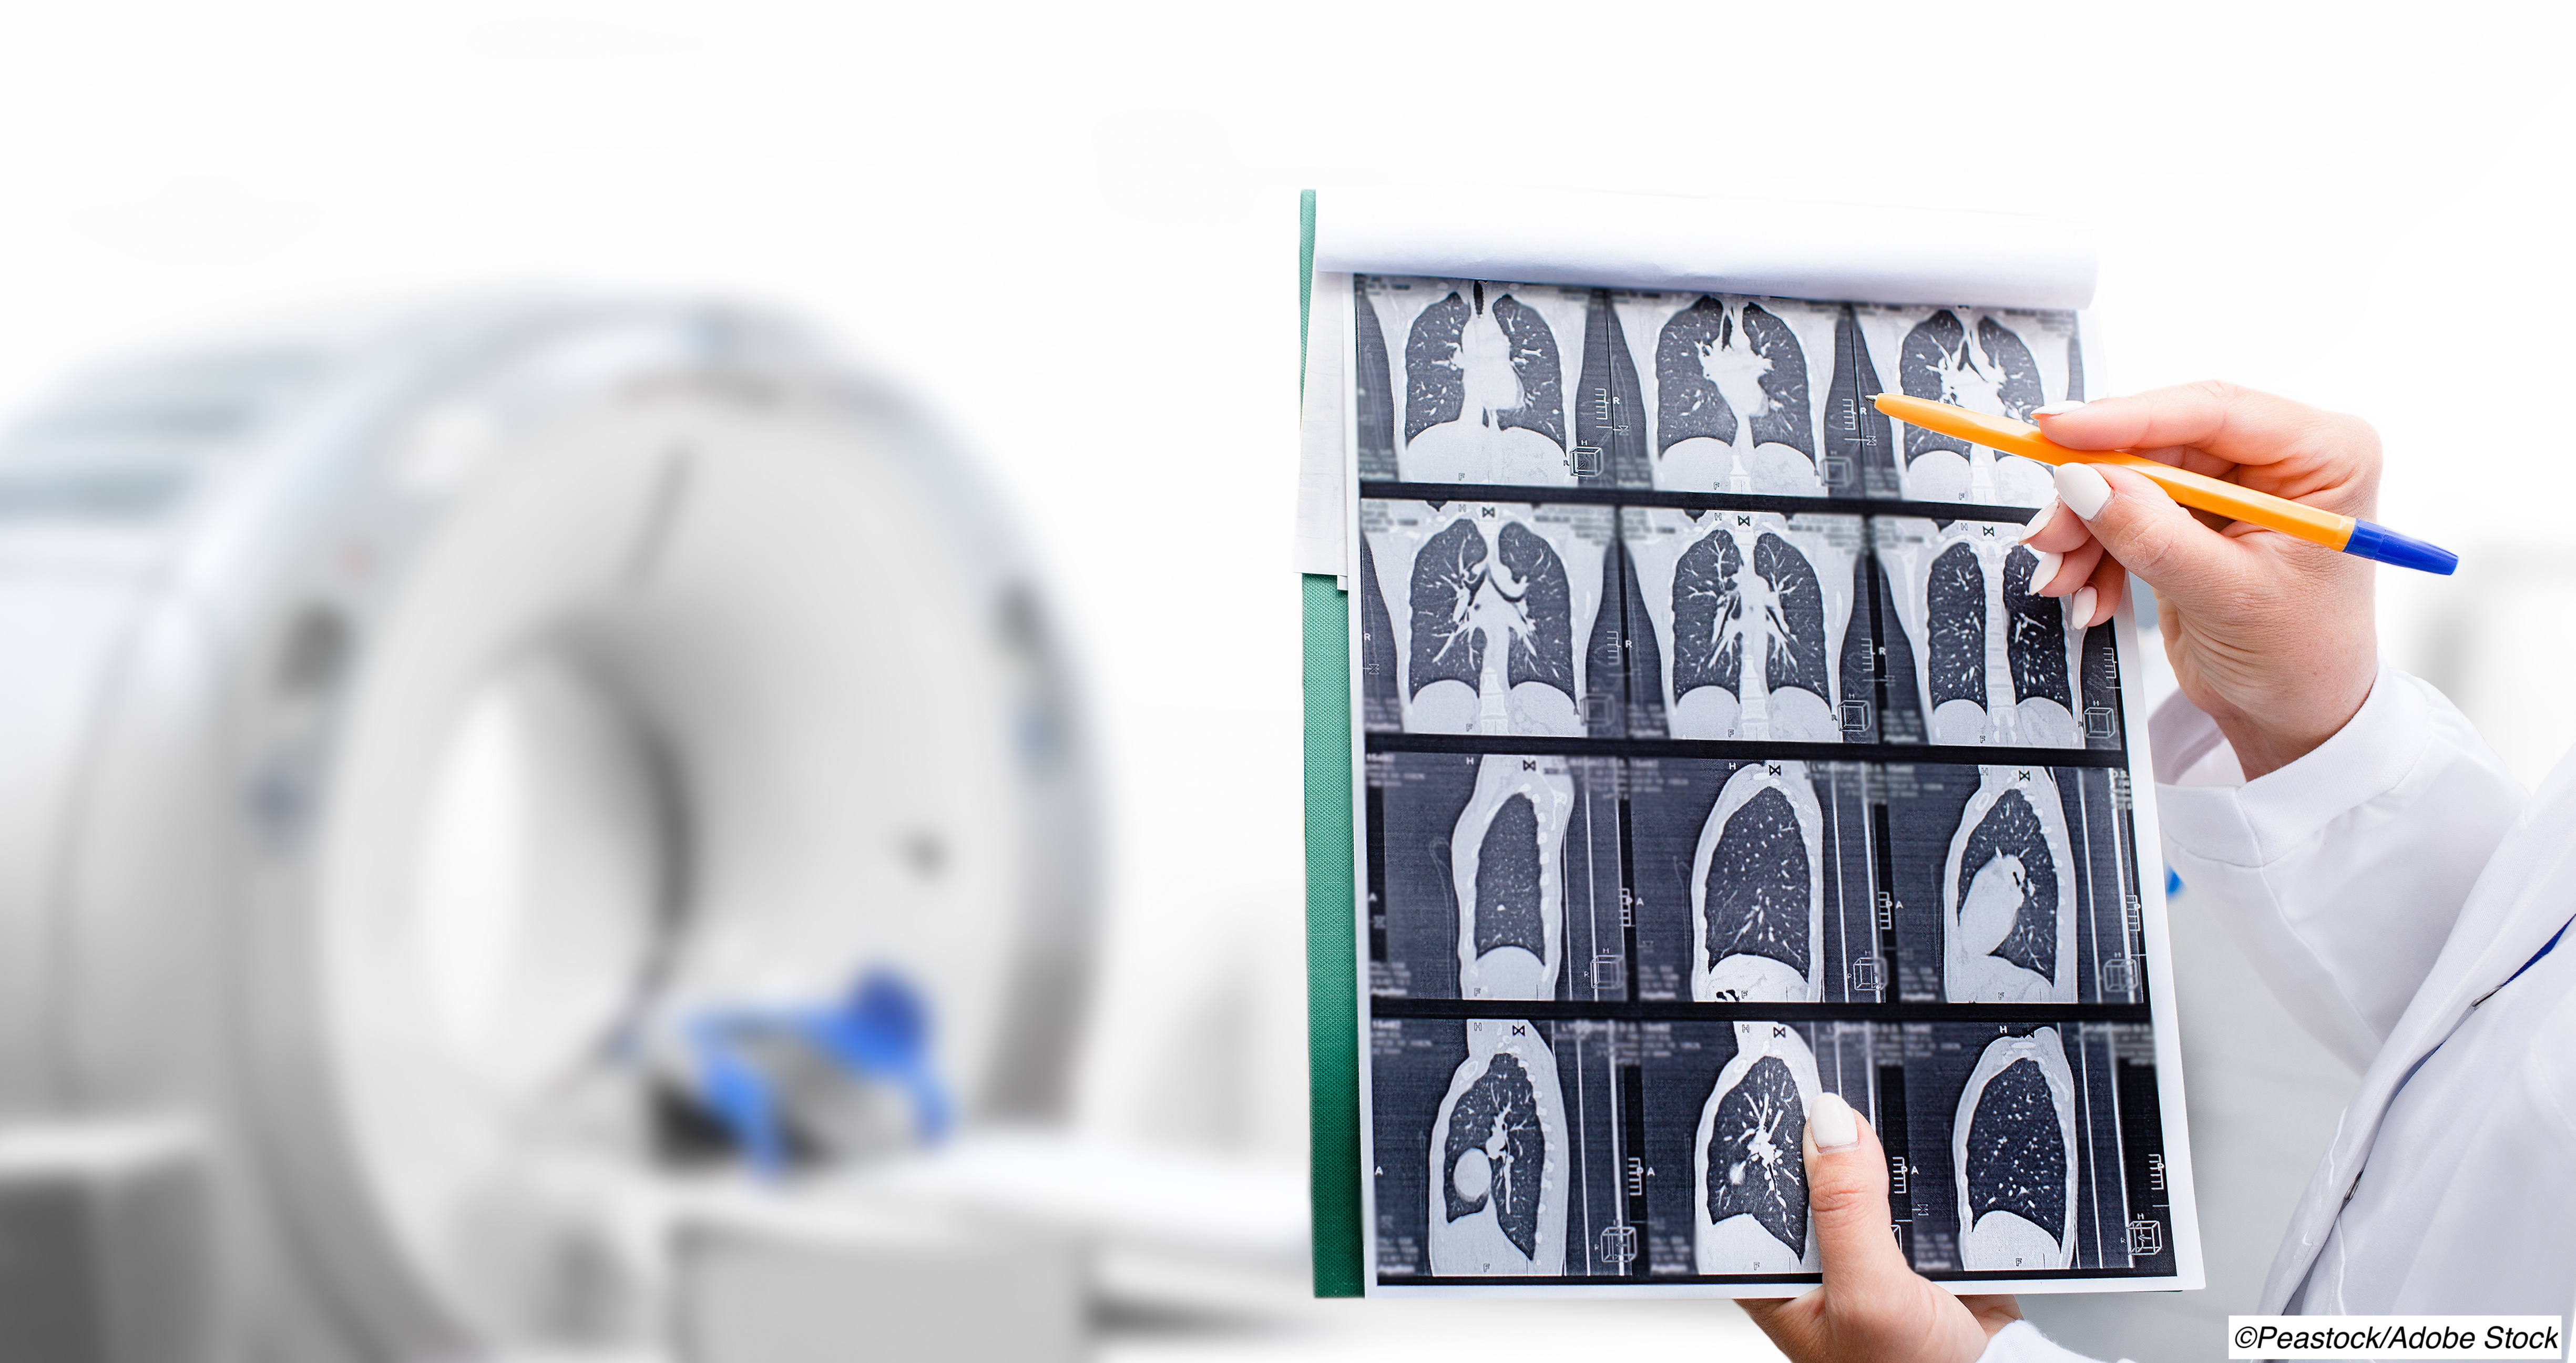 Broader USPSTF Guidelines for Lung Ca Screening Help Reduce Racial Disparity